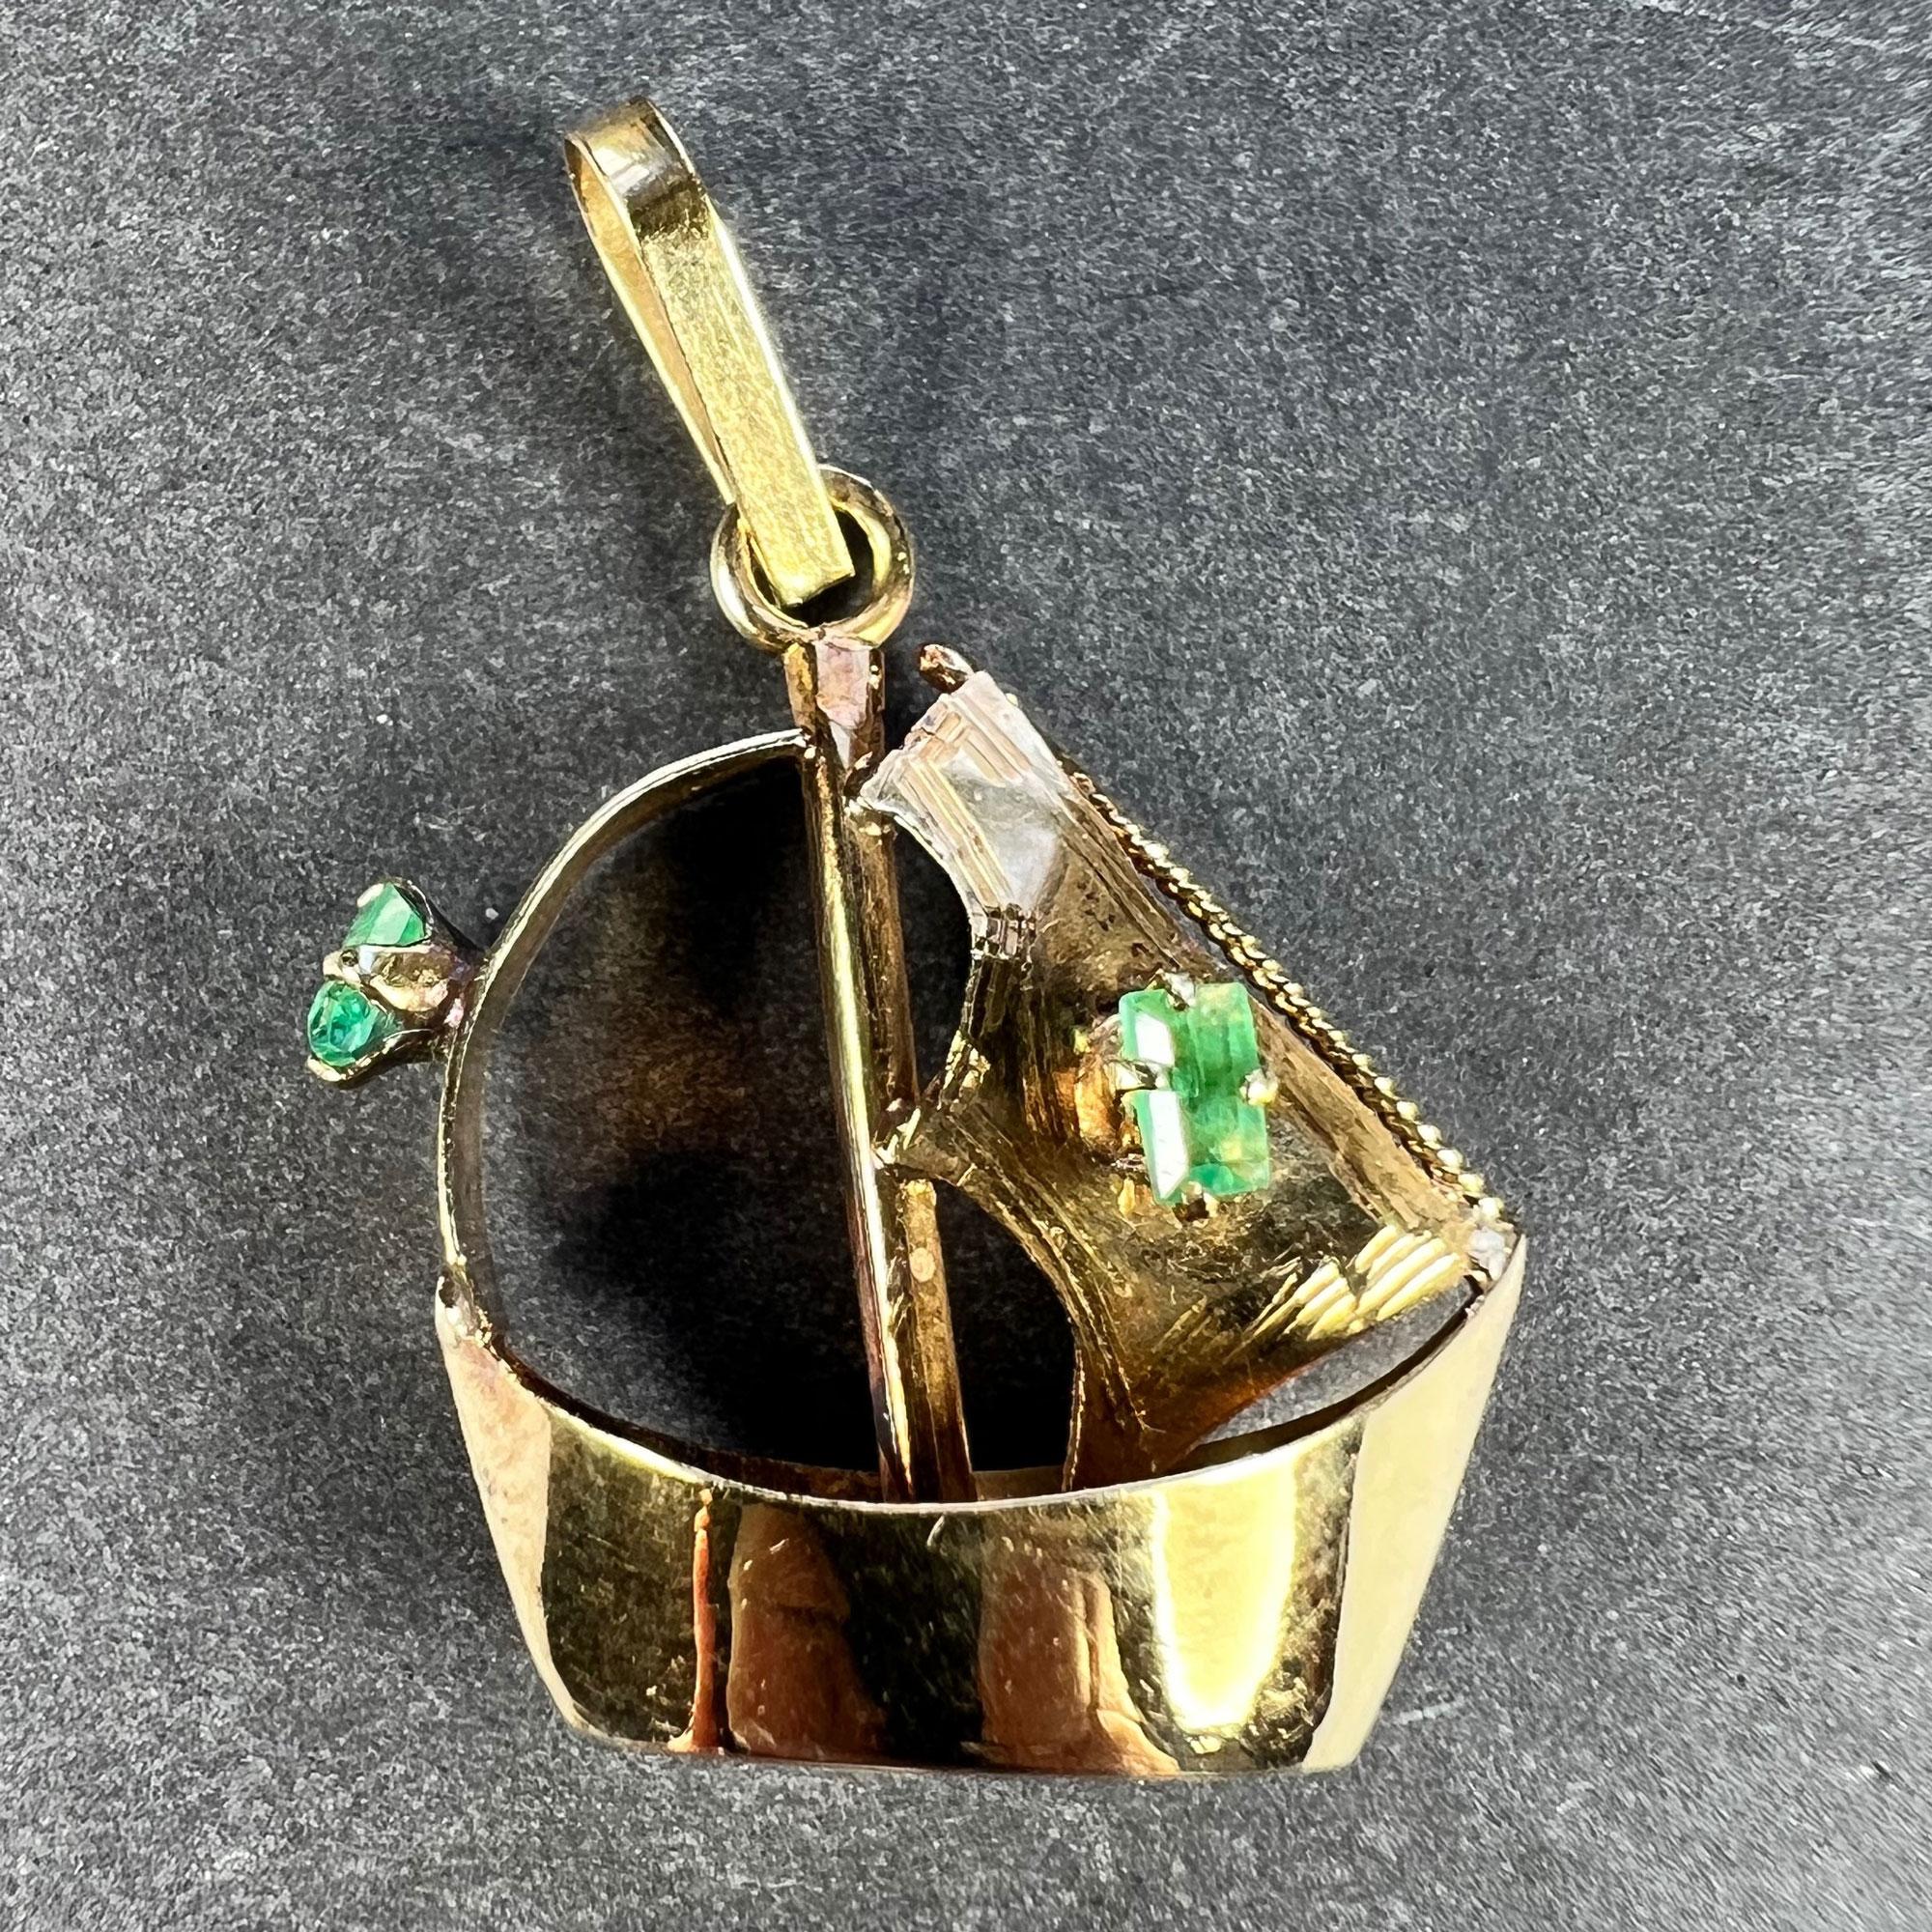 An 18 karat (18K) yellow gold charm pendant designed as a sailing yacht or boat. Set with two natural emerald-cut emeralds to the sails. Stamped 18K to the base for 18 karat gold.

Total gem weight: approximately 0.10 carats
Dimensions: 2 x 1.9 x